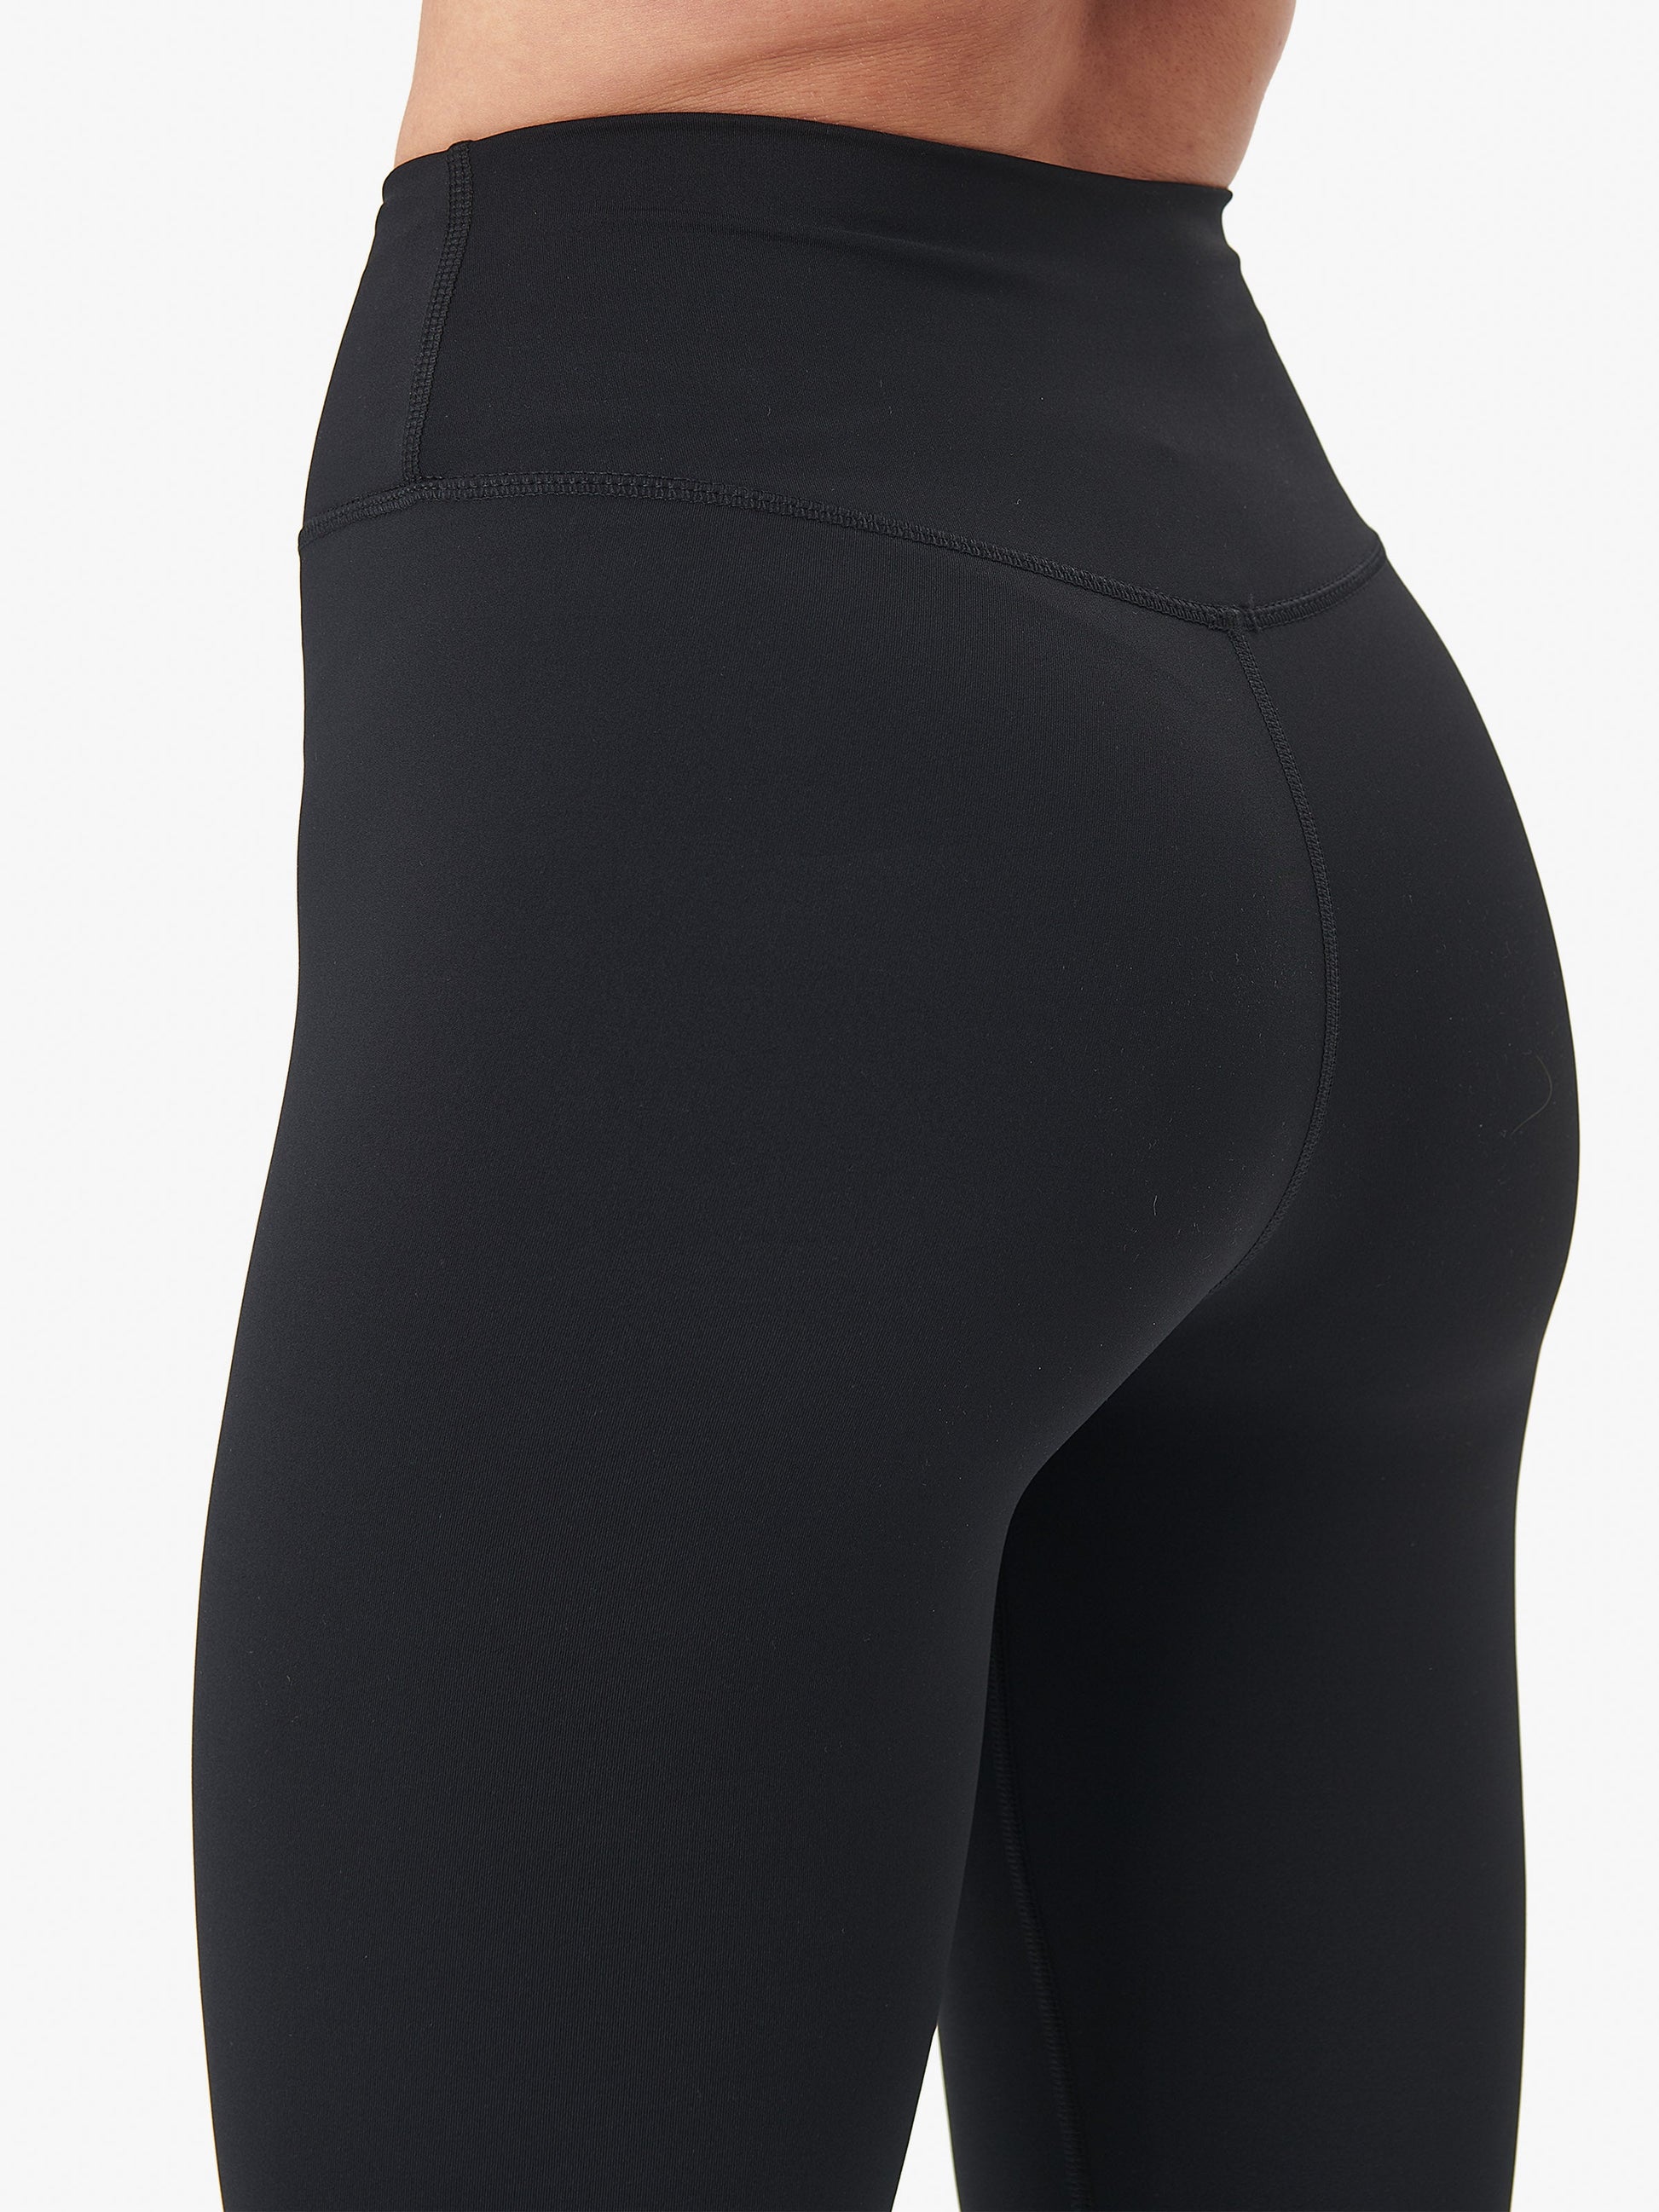 Second Skin Black Essential High Waisted Leggings in SKN Signature